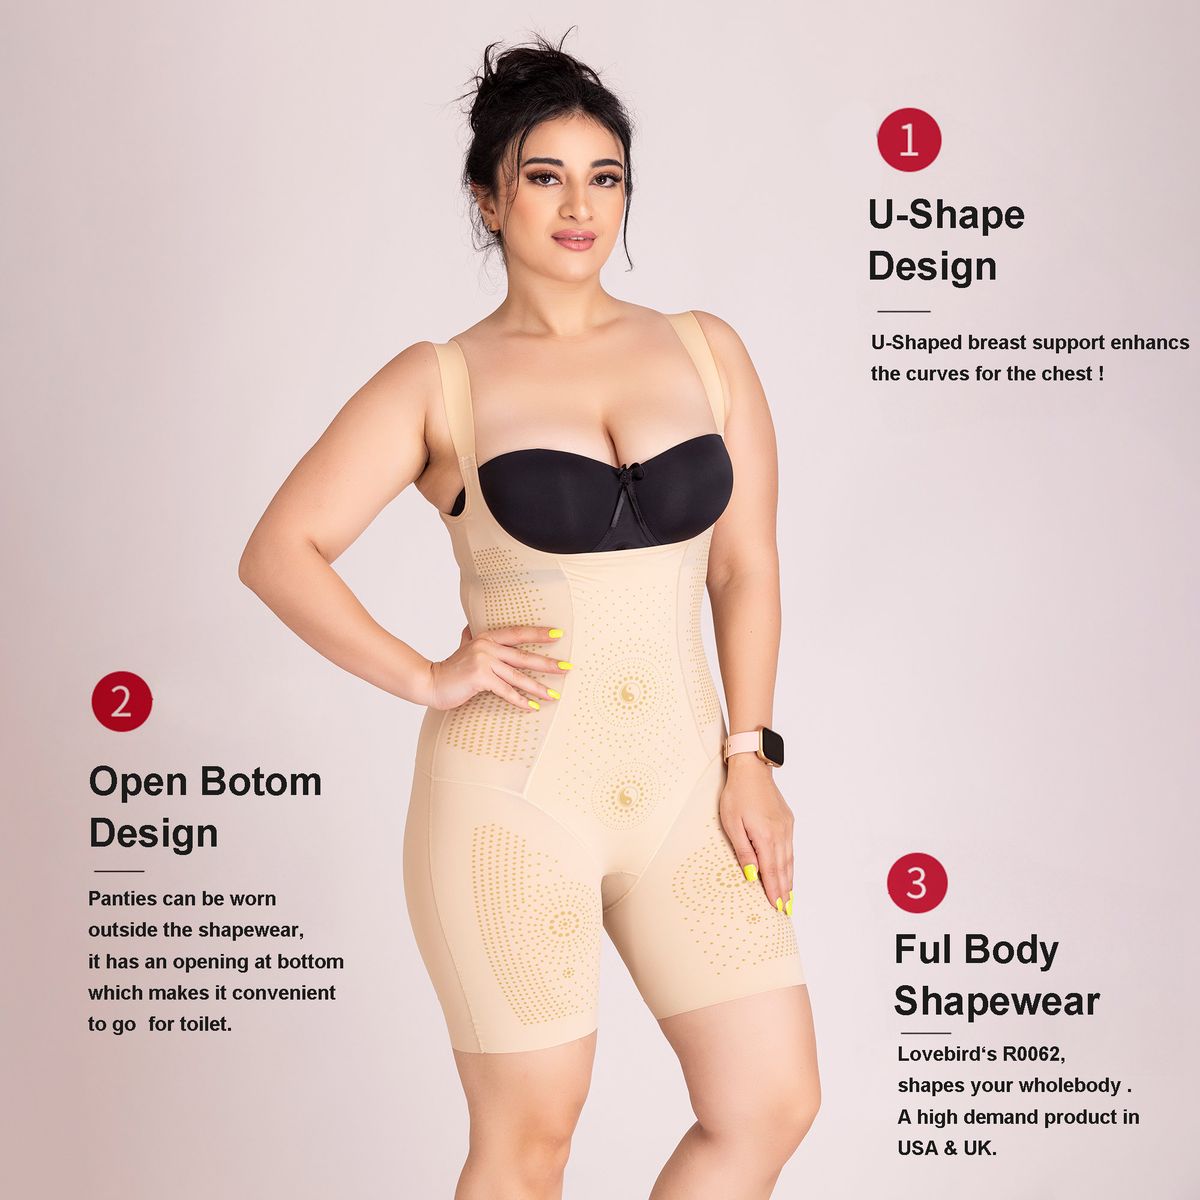 R0062 Hip Lifter and Shapewear